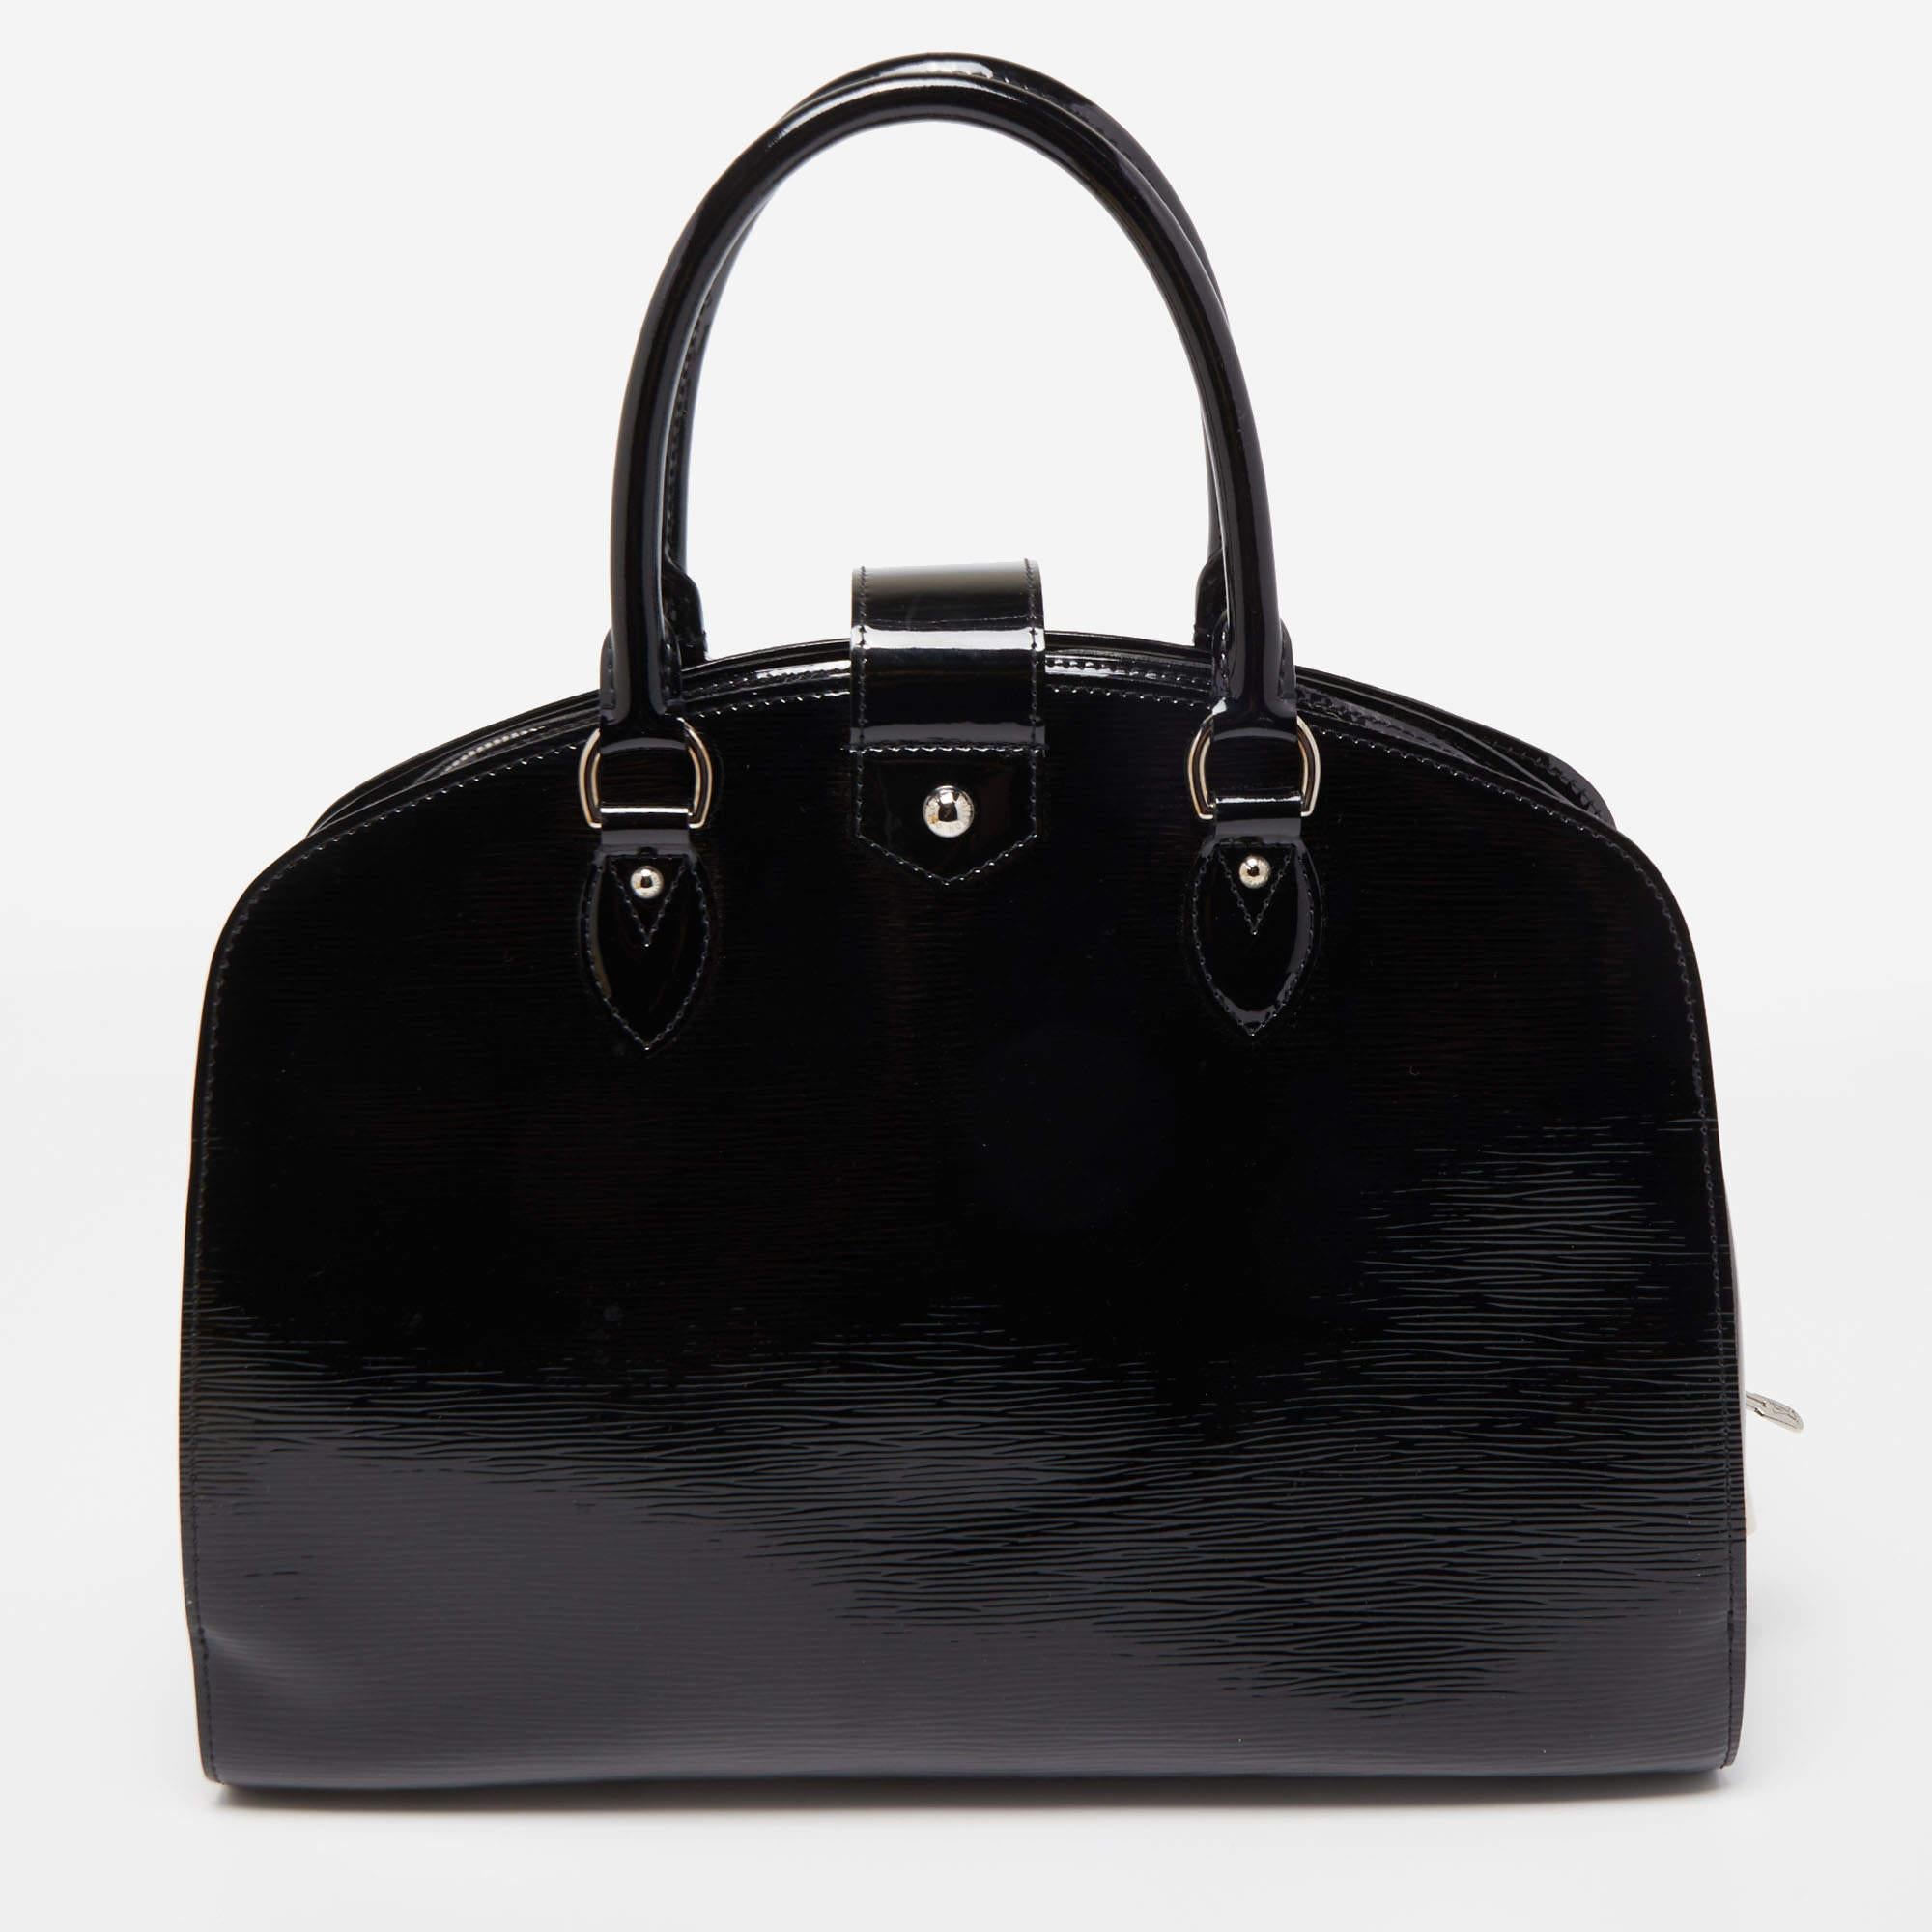 This Louis Vuitton Electric Epi leather bag is an example of the brand's fine designs that are skillfully crafted to project a classic charm. It is a functional creation with an elevating appeal.

